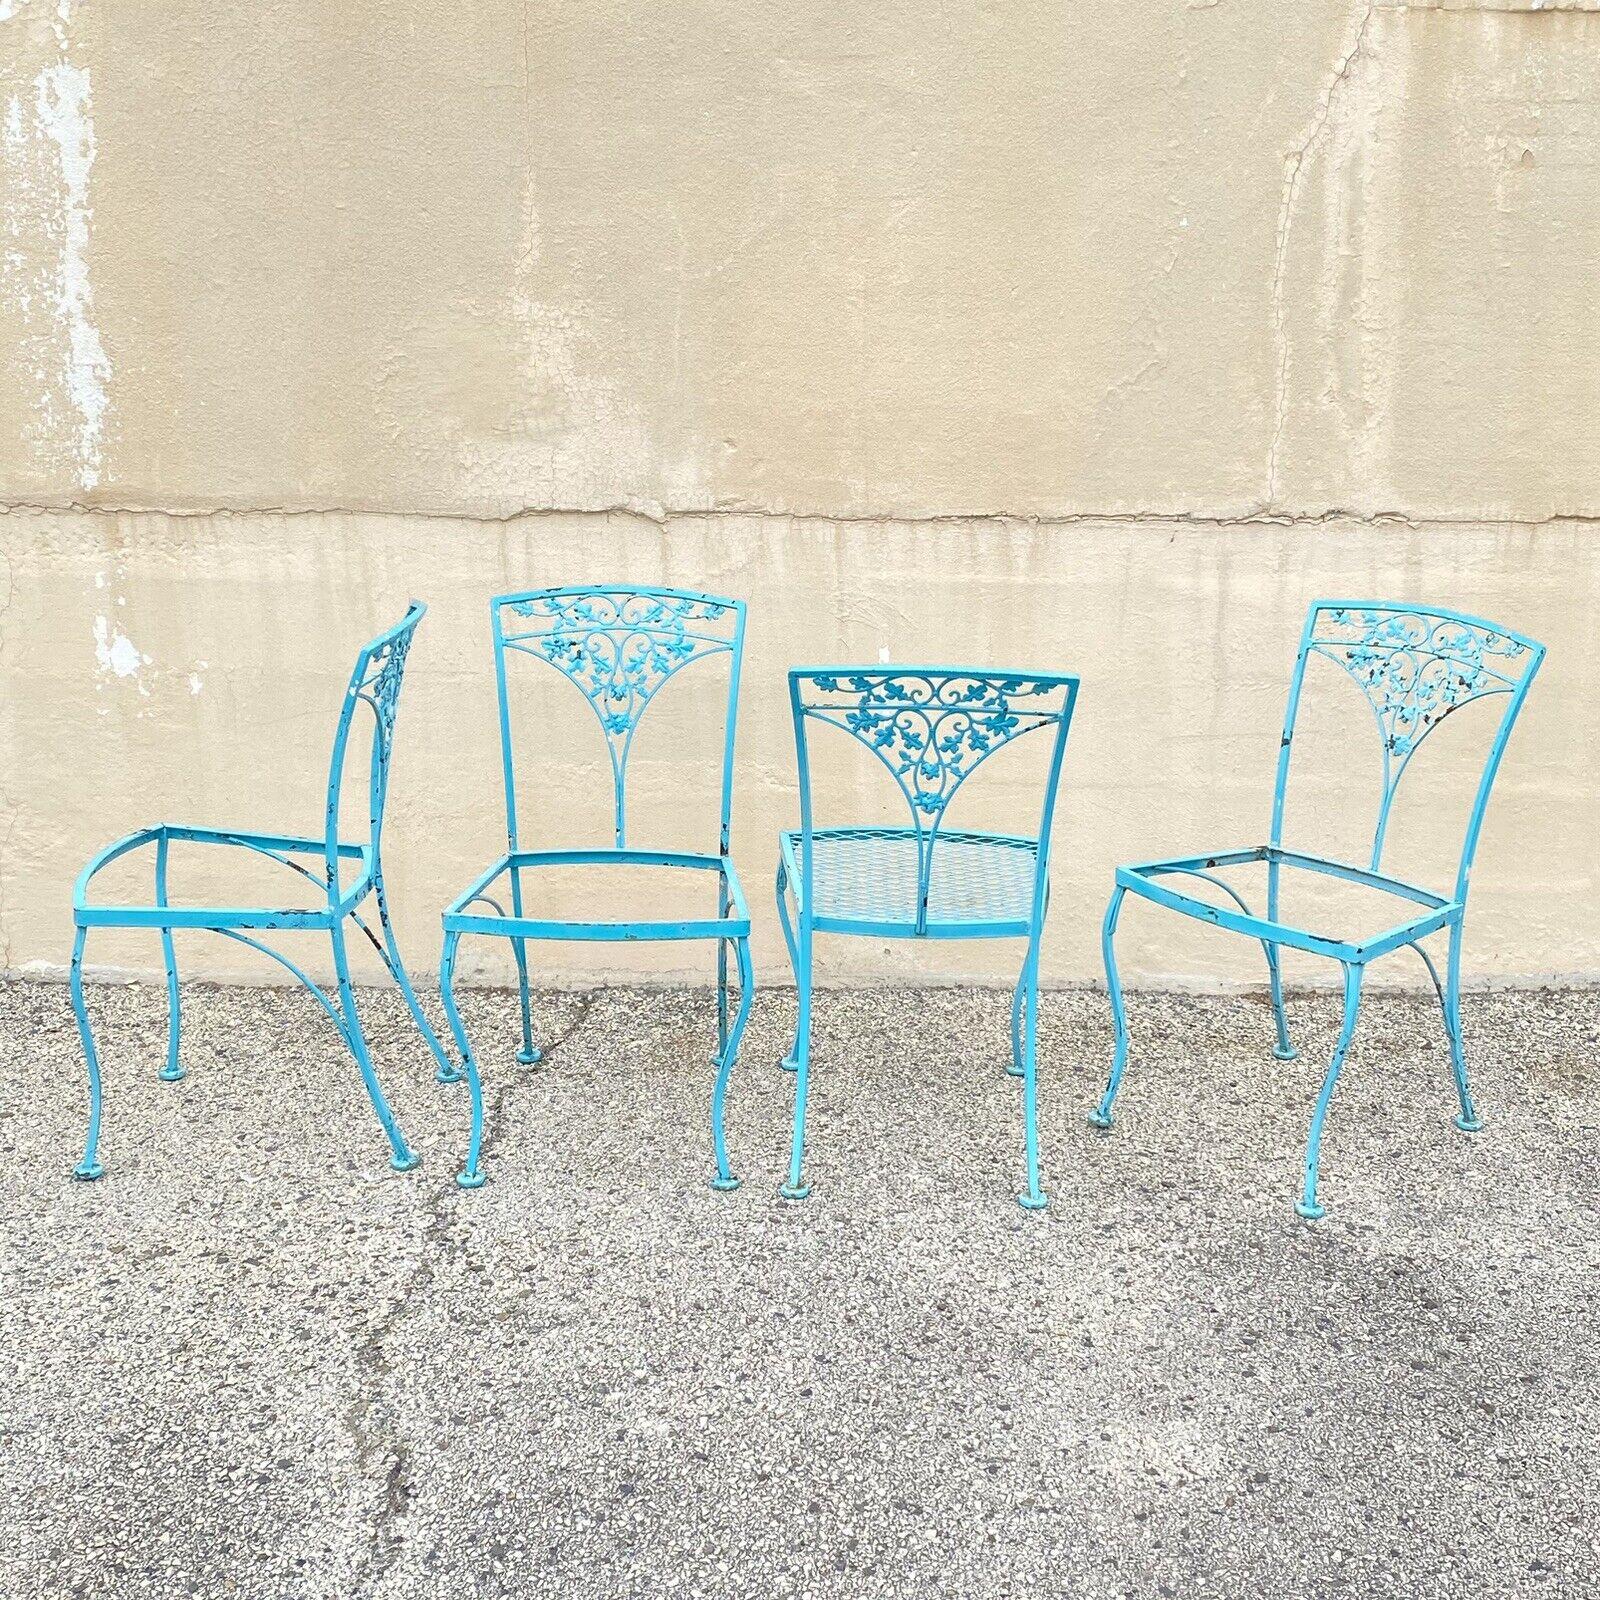 Vintage Woodard Orleans Pattern Wrought Iron Garden Patio Dining Chairs - Set of 4. Circa Mid 20th Century. Measurements: 33.5